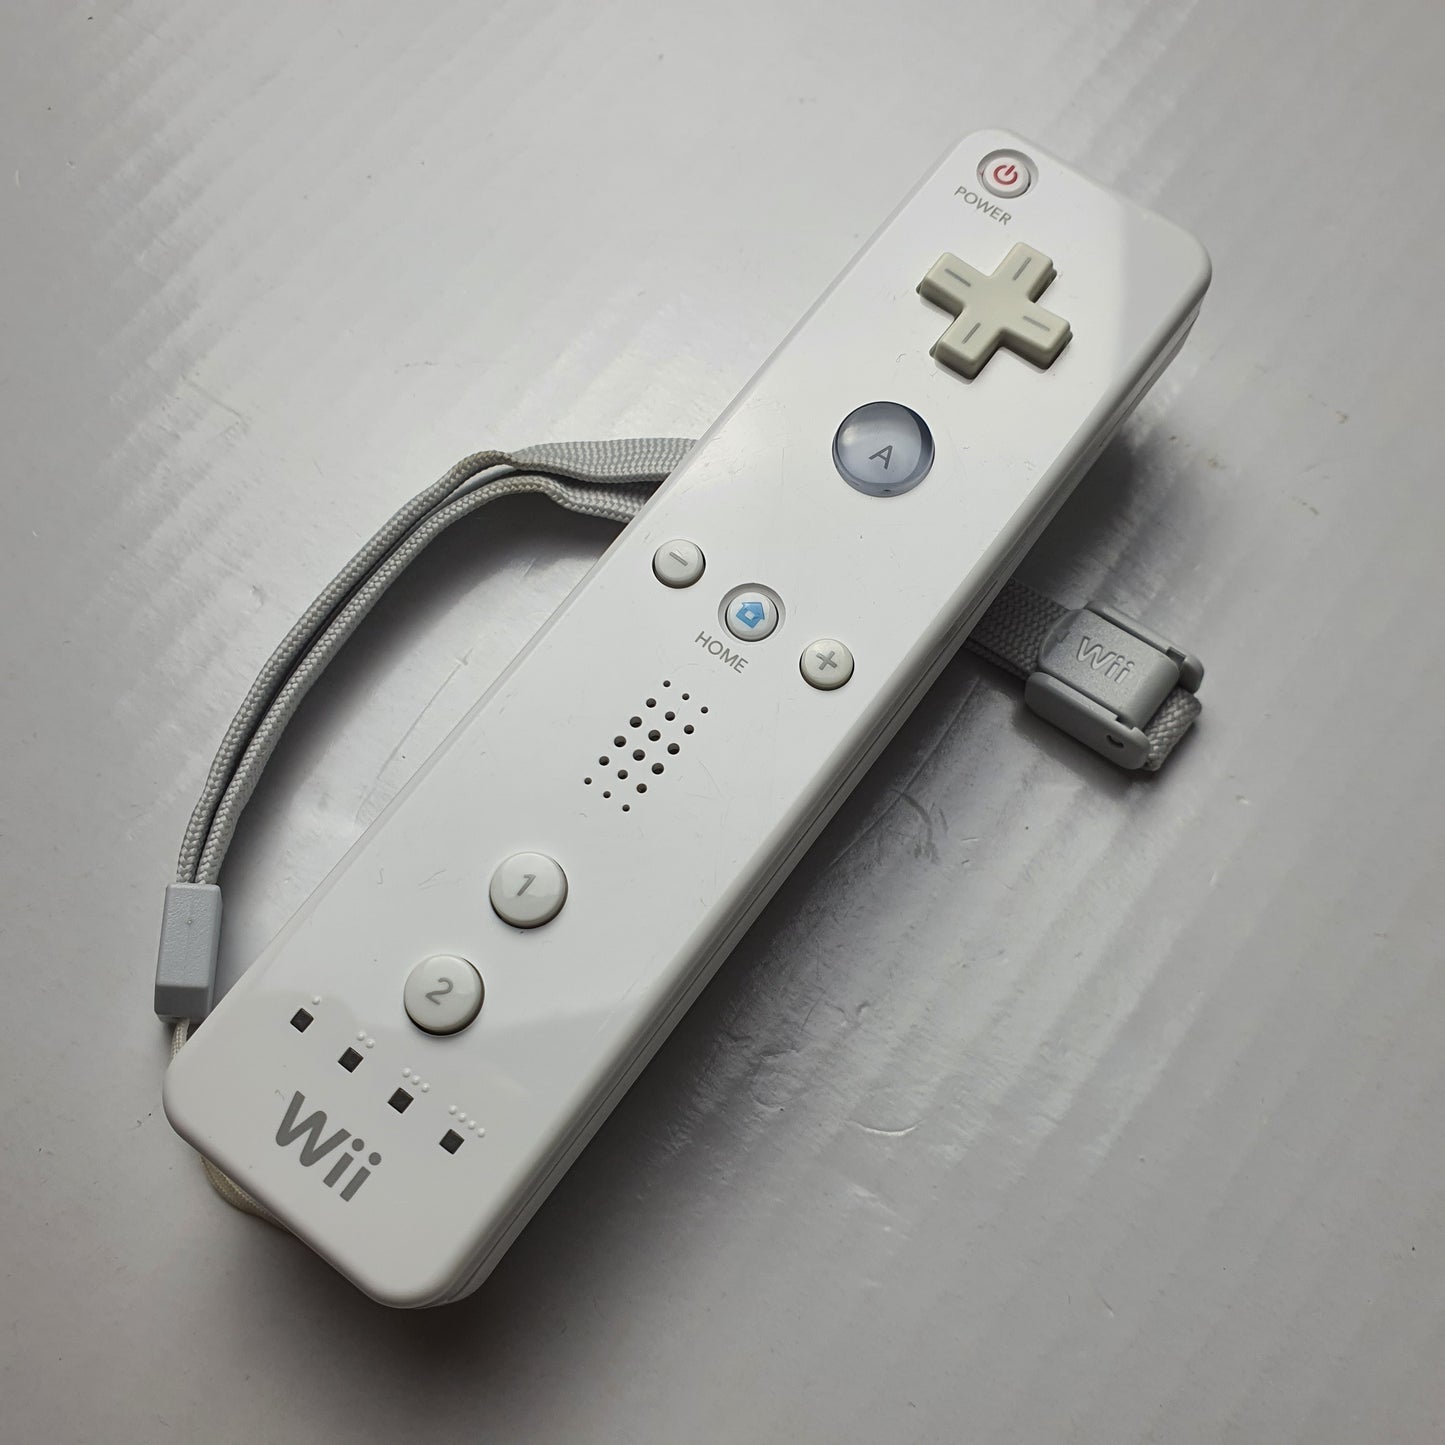 Wii Remote/Controller Bundle White - Includes Remote, Nunchuk, Motion Plus Adaptor, Protective Case